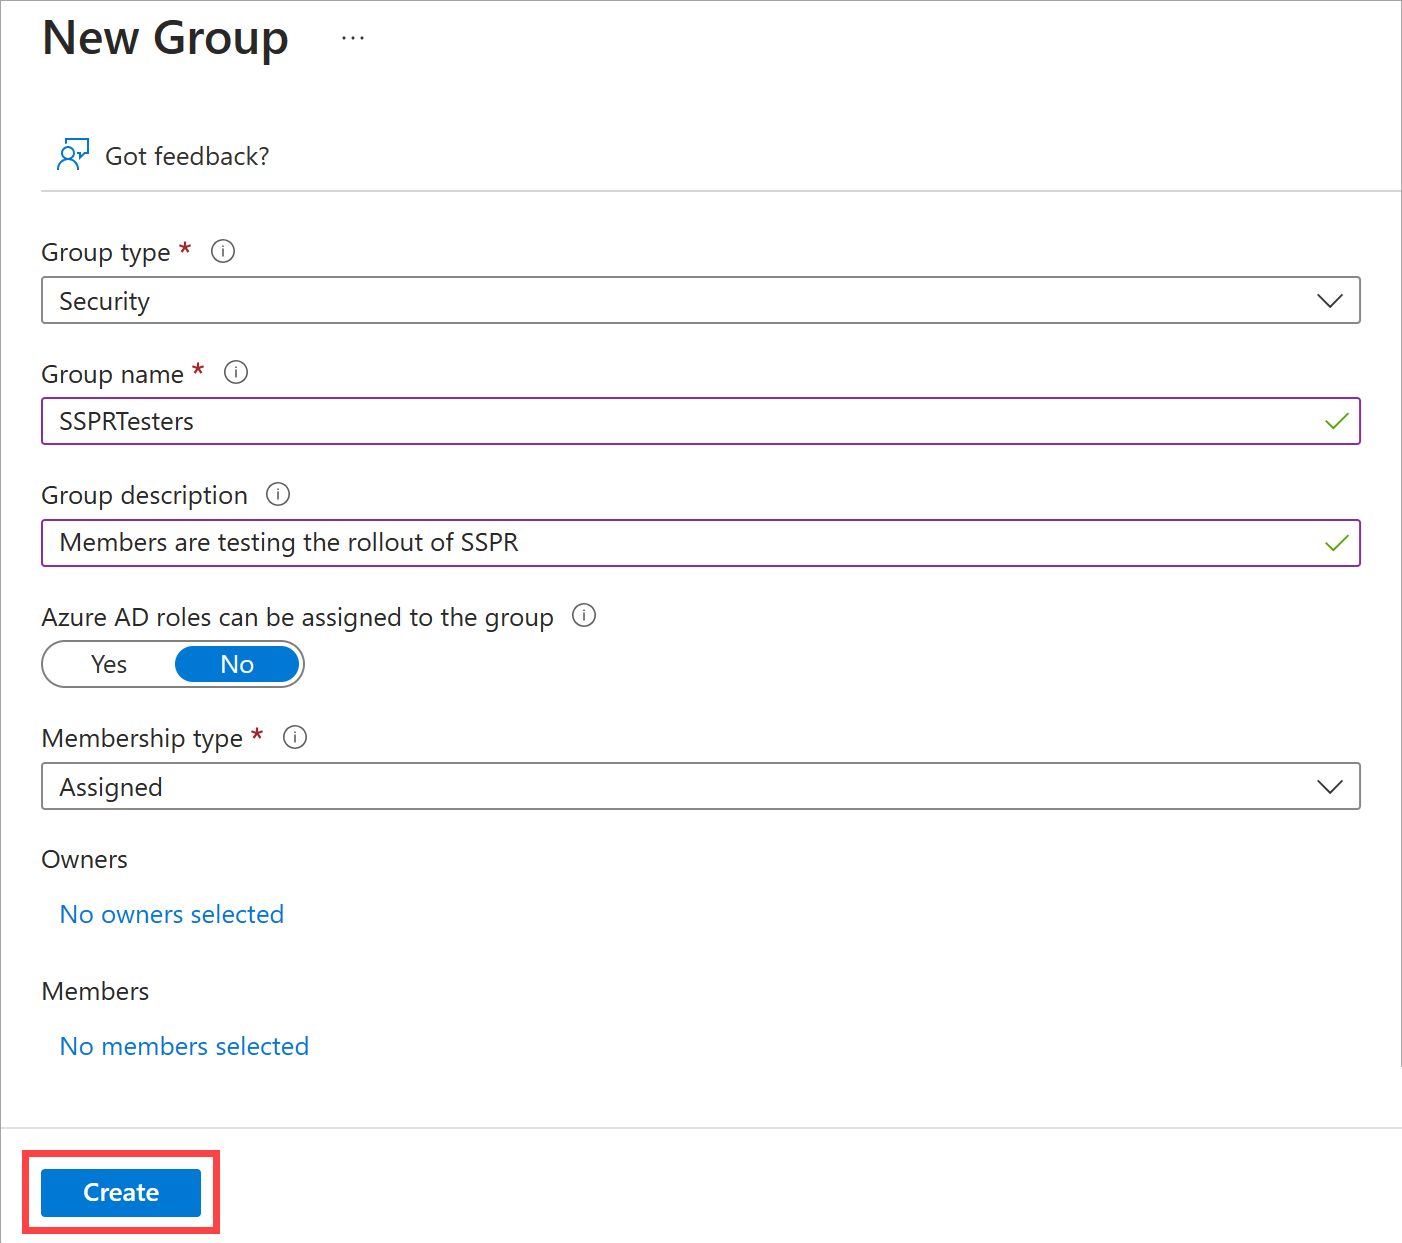 Screenshot that shows new group form filled out and the create button highlighted.